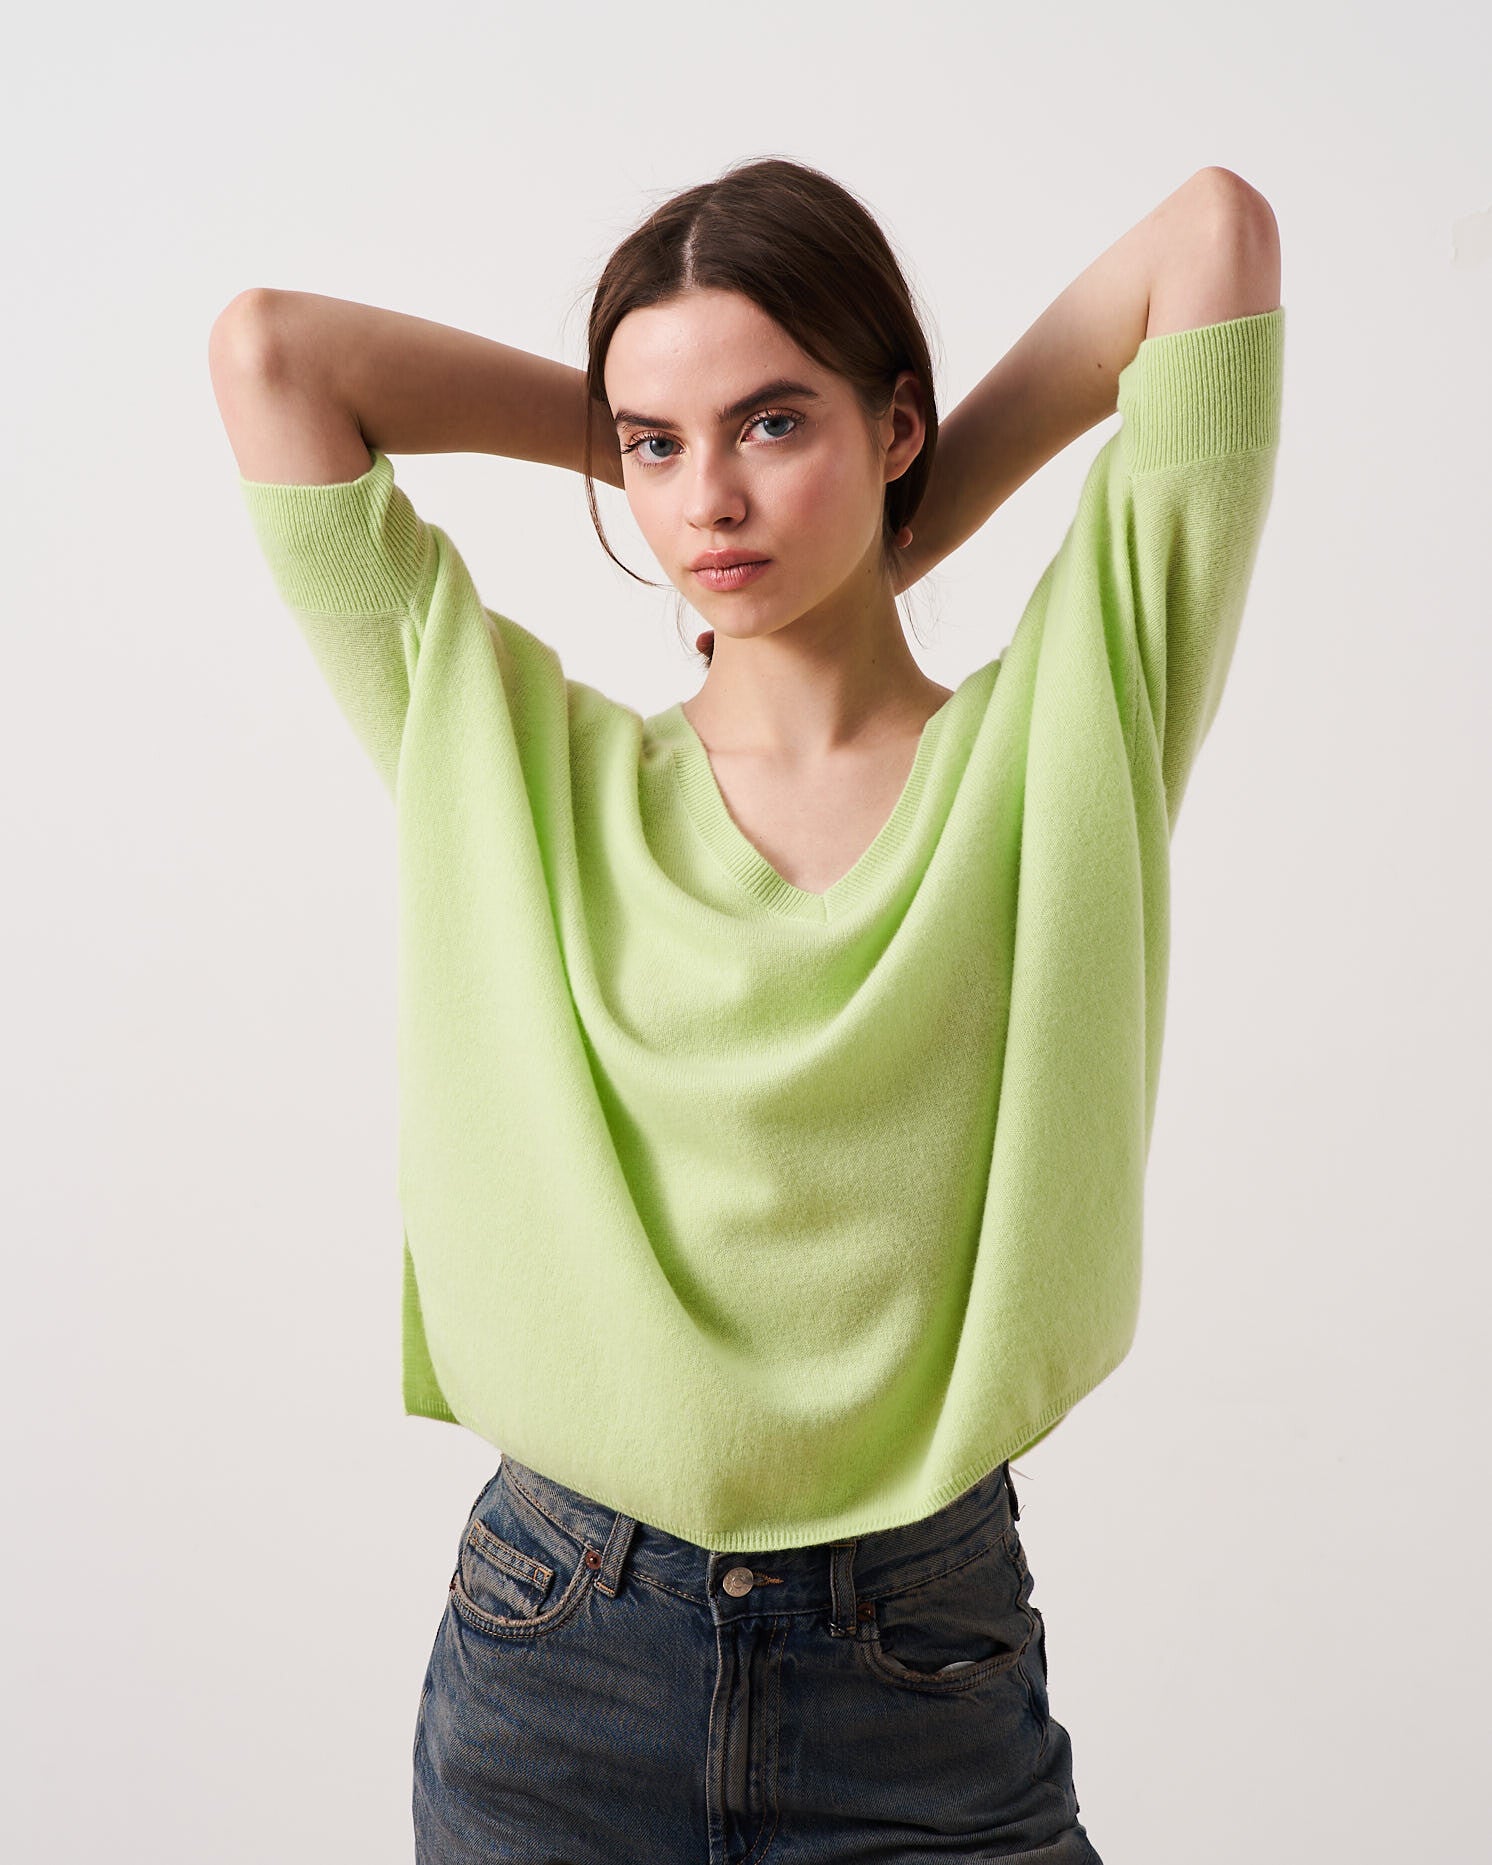 Sweater Kate - Absolut Cashmere